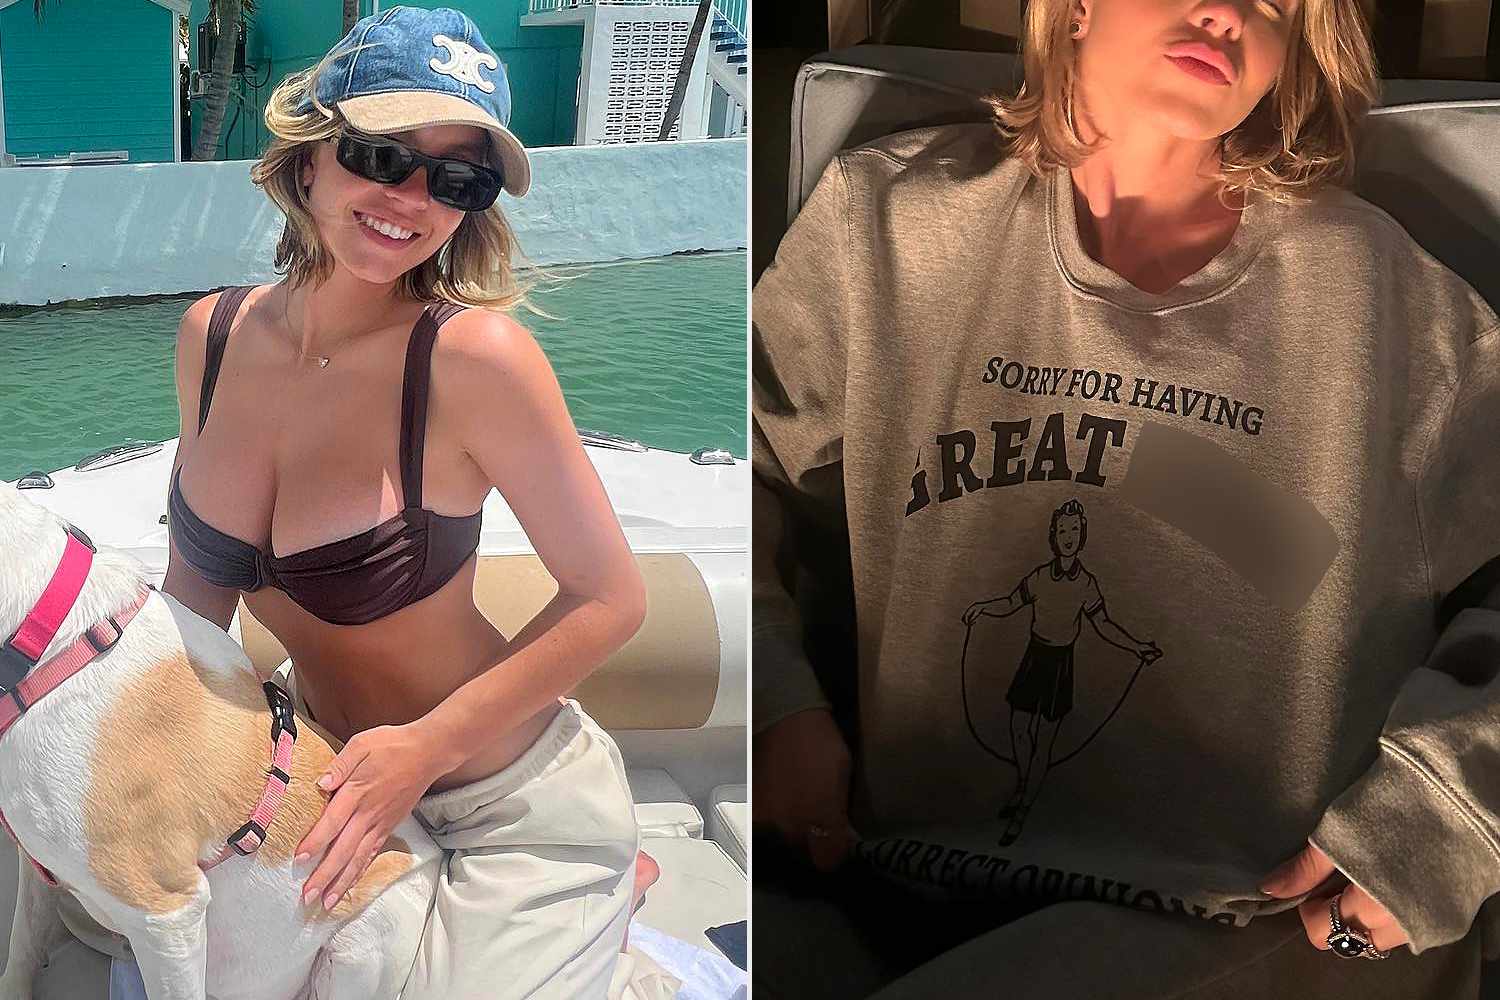 Sydney Sweeney Jokes That She’s Sorry for Having ‘Great’ Boobs During Mexico Vacation